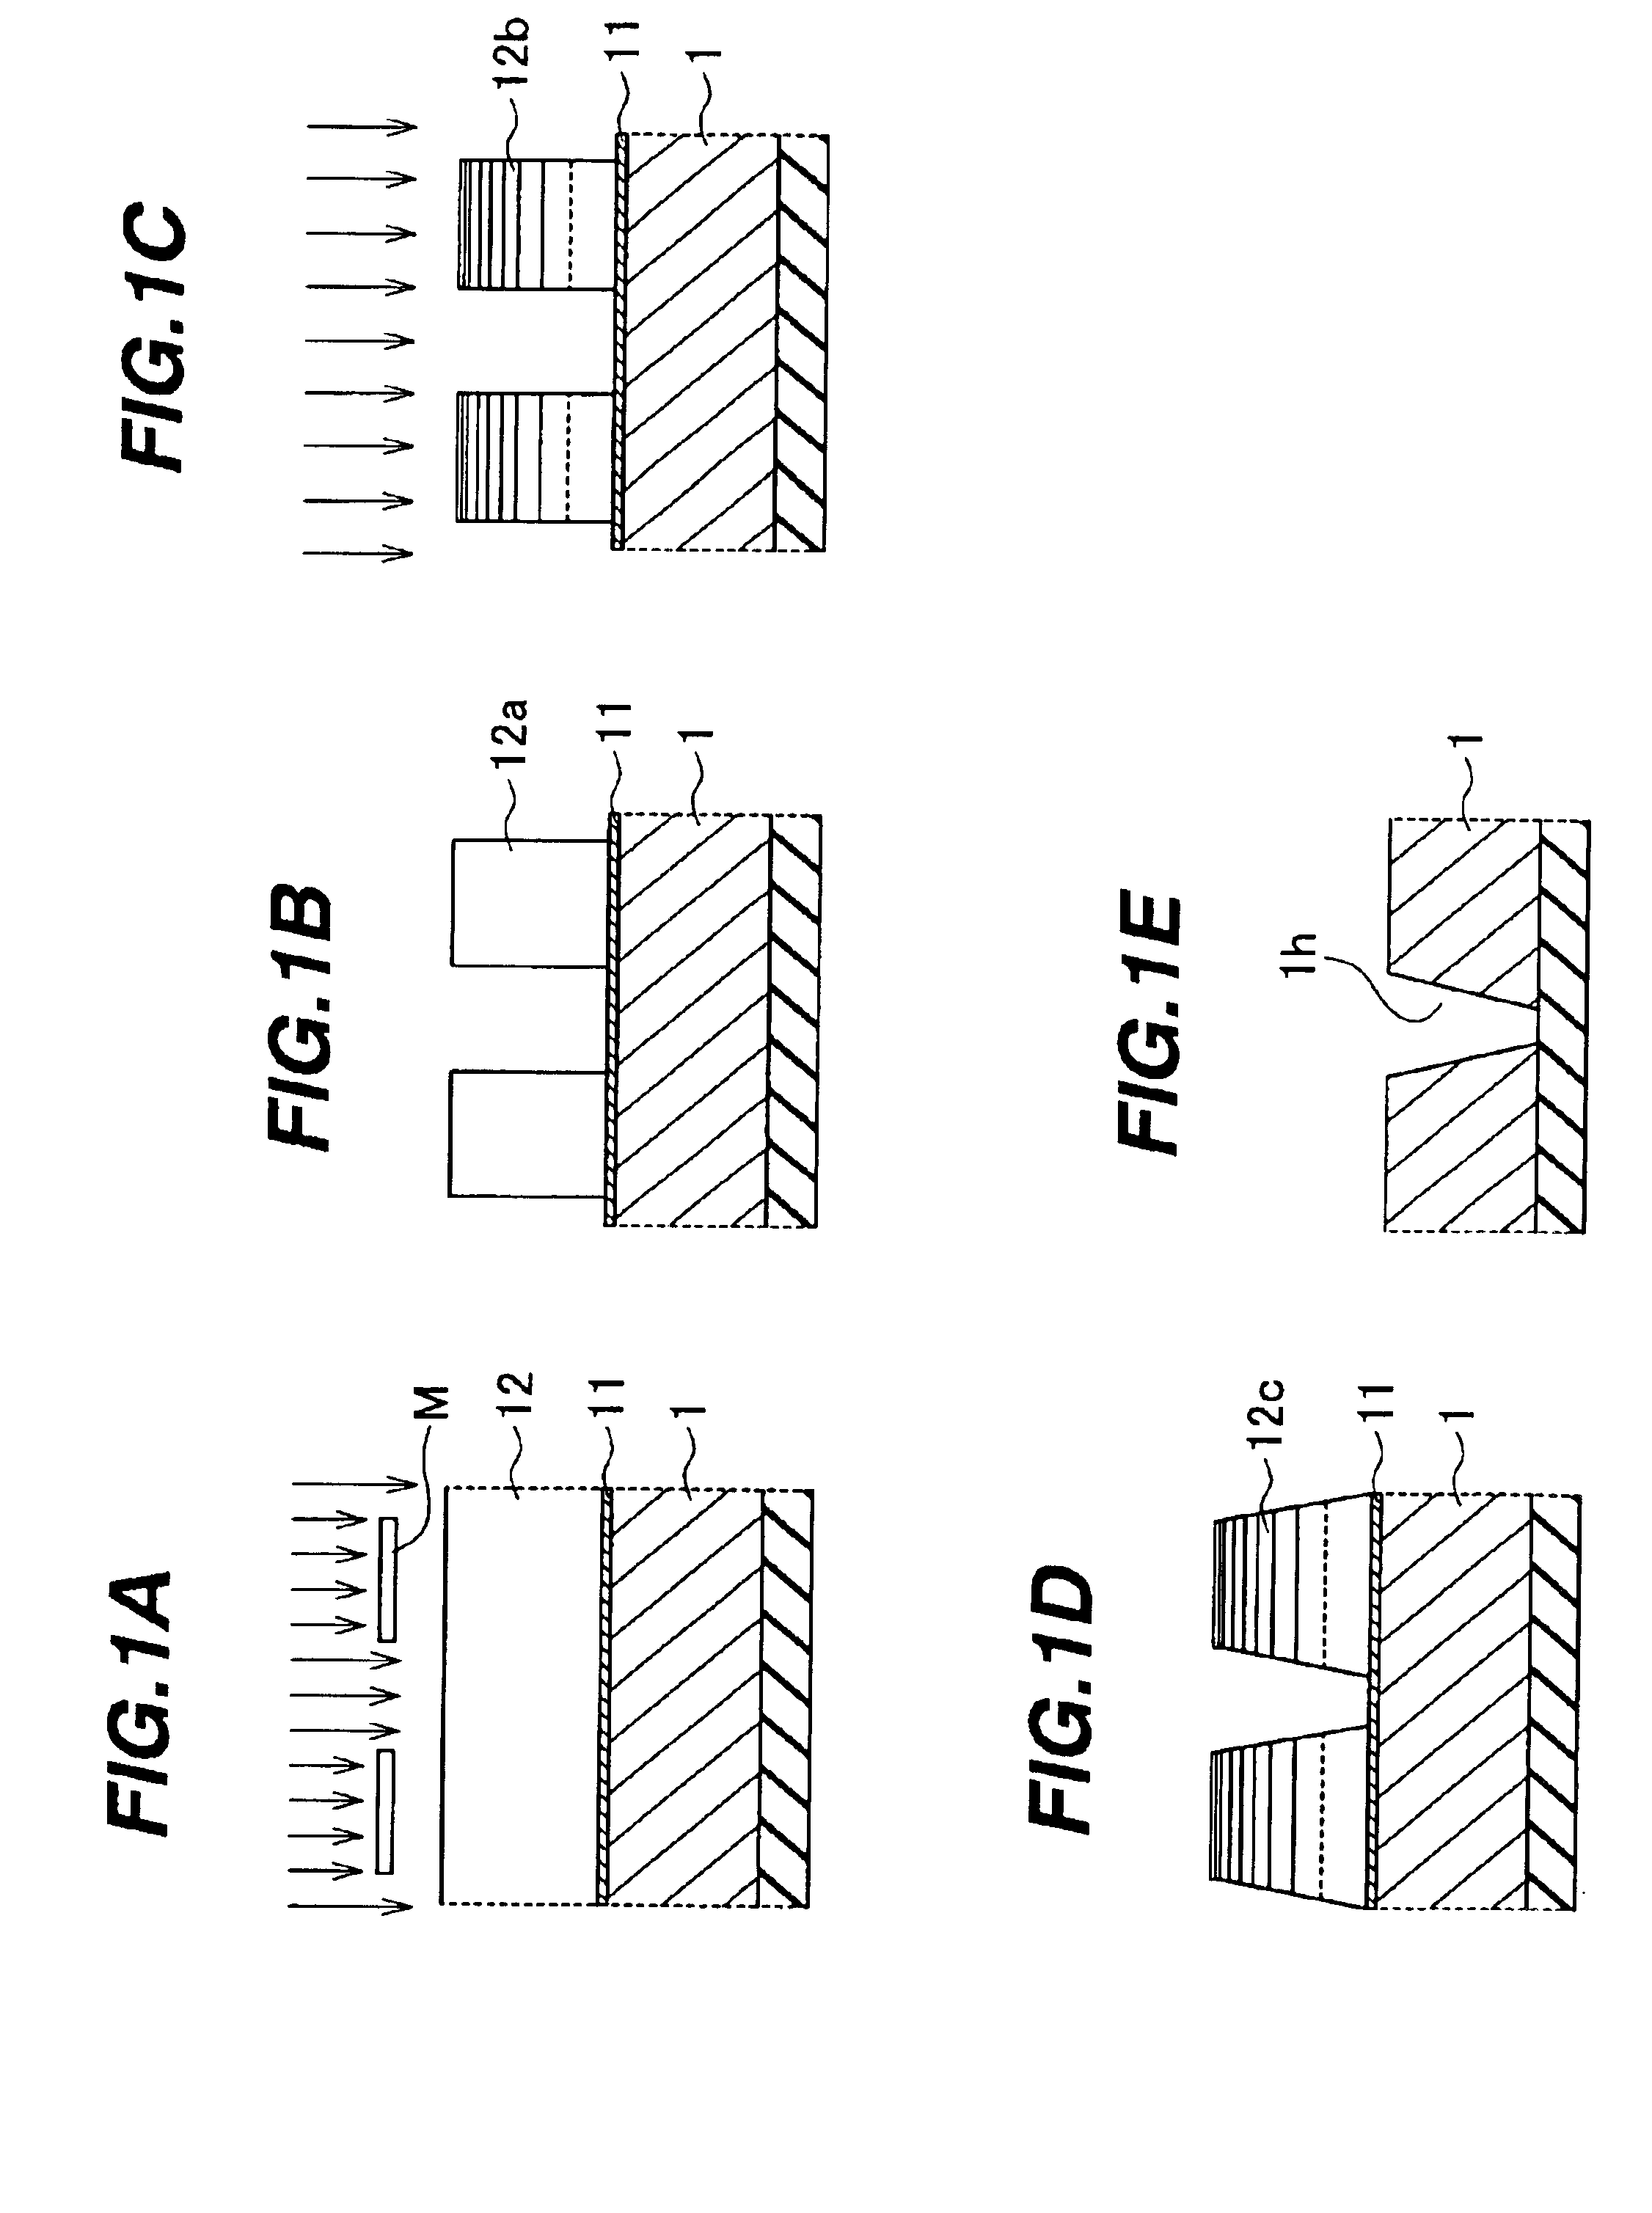 Method of forming a resist pattern and fabricating tapered features